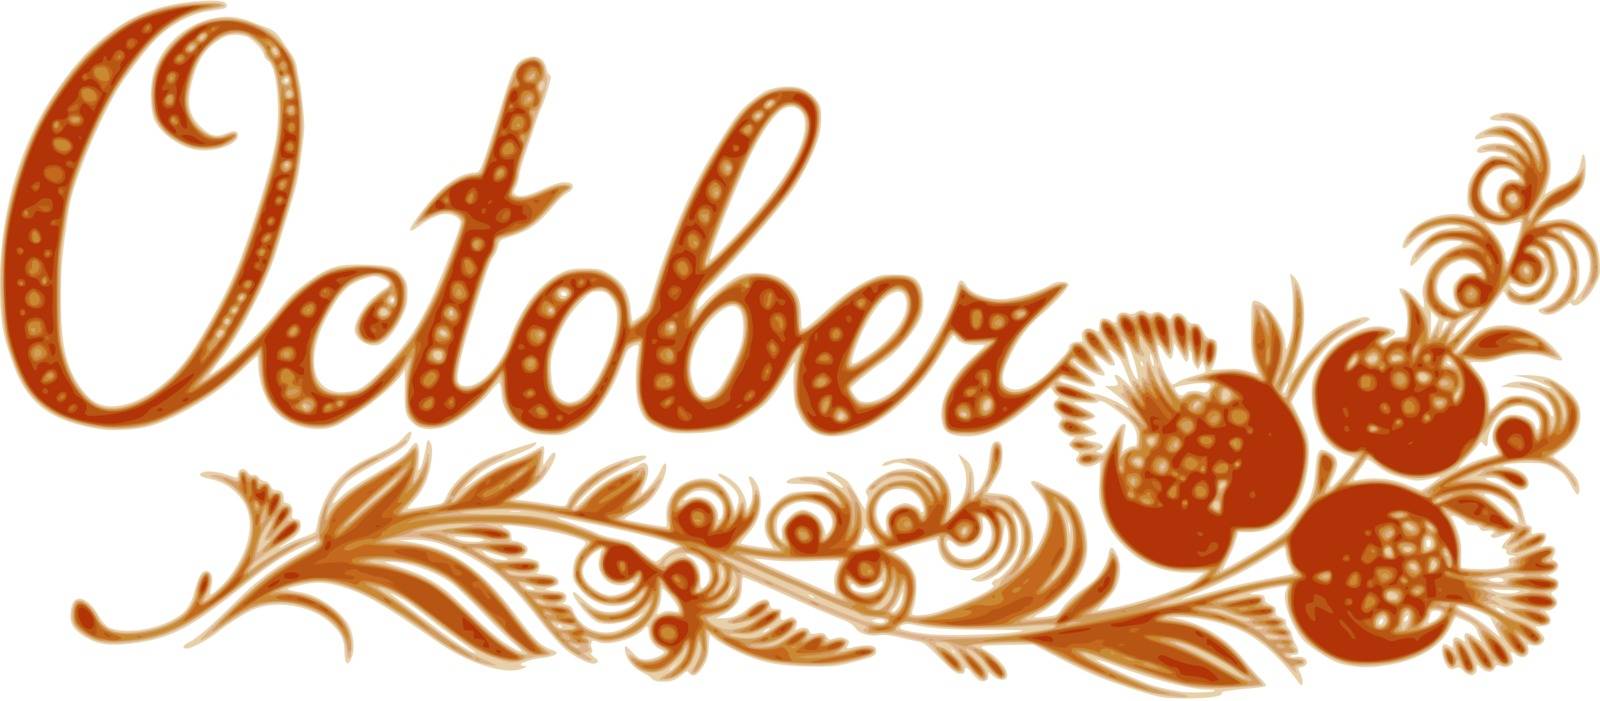 October name of the month, hand drawn, illustration in Ukrainian folk style